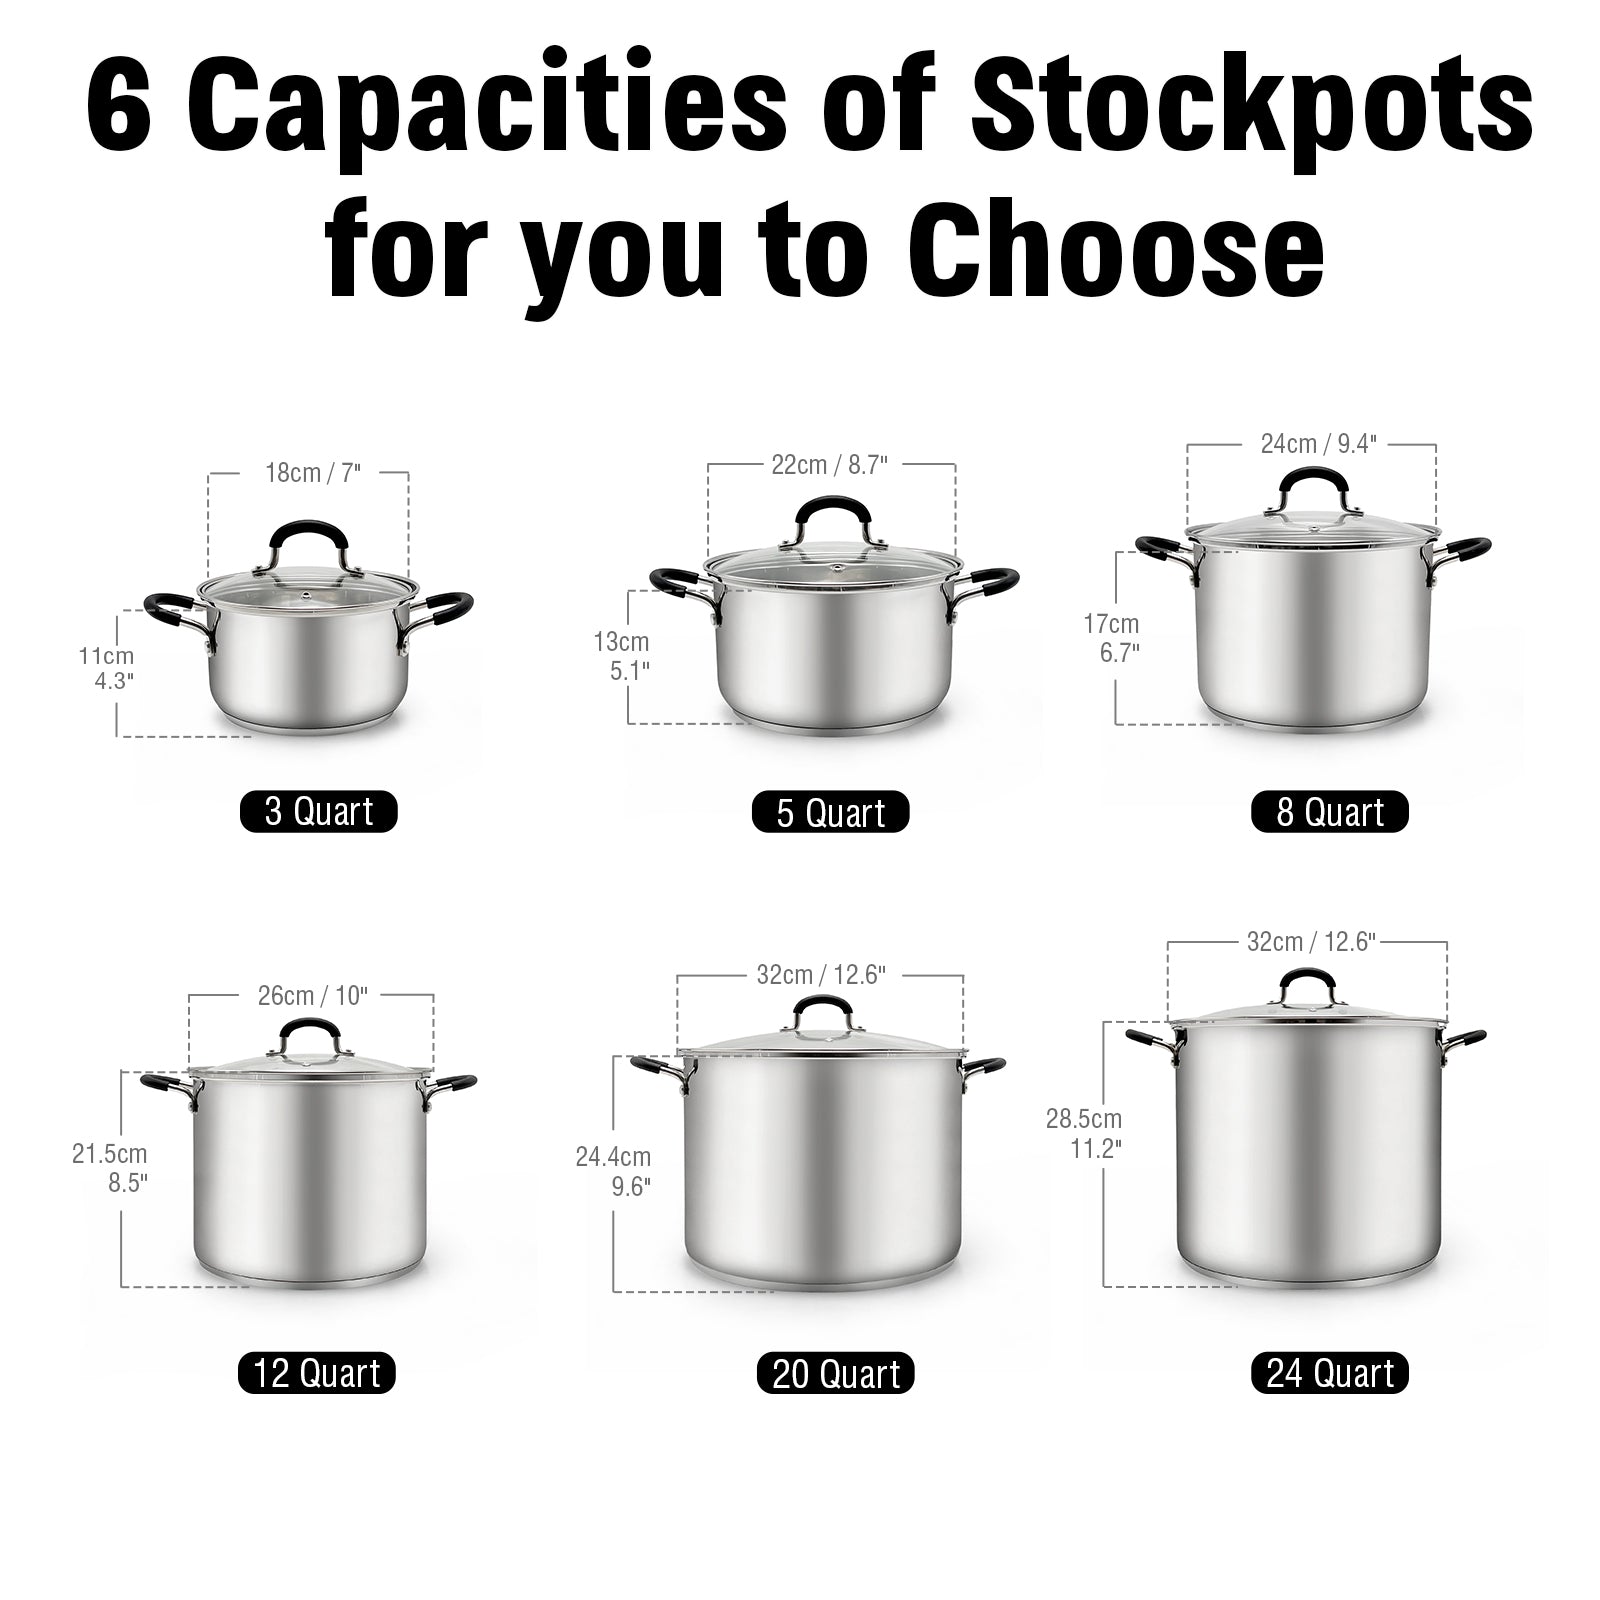 Cook N Home Stock Pot with Lid, Basics Stainless Steel Casserole Stockpots,  5-Quart